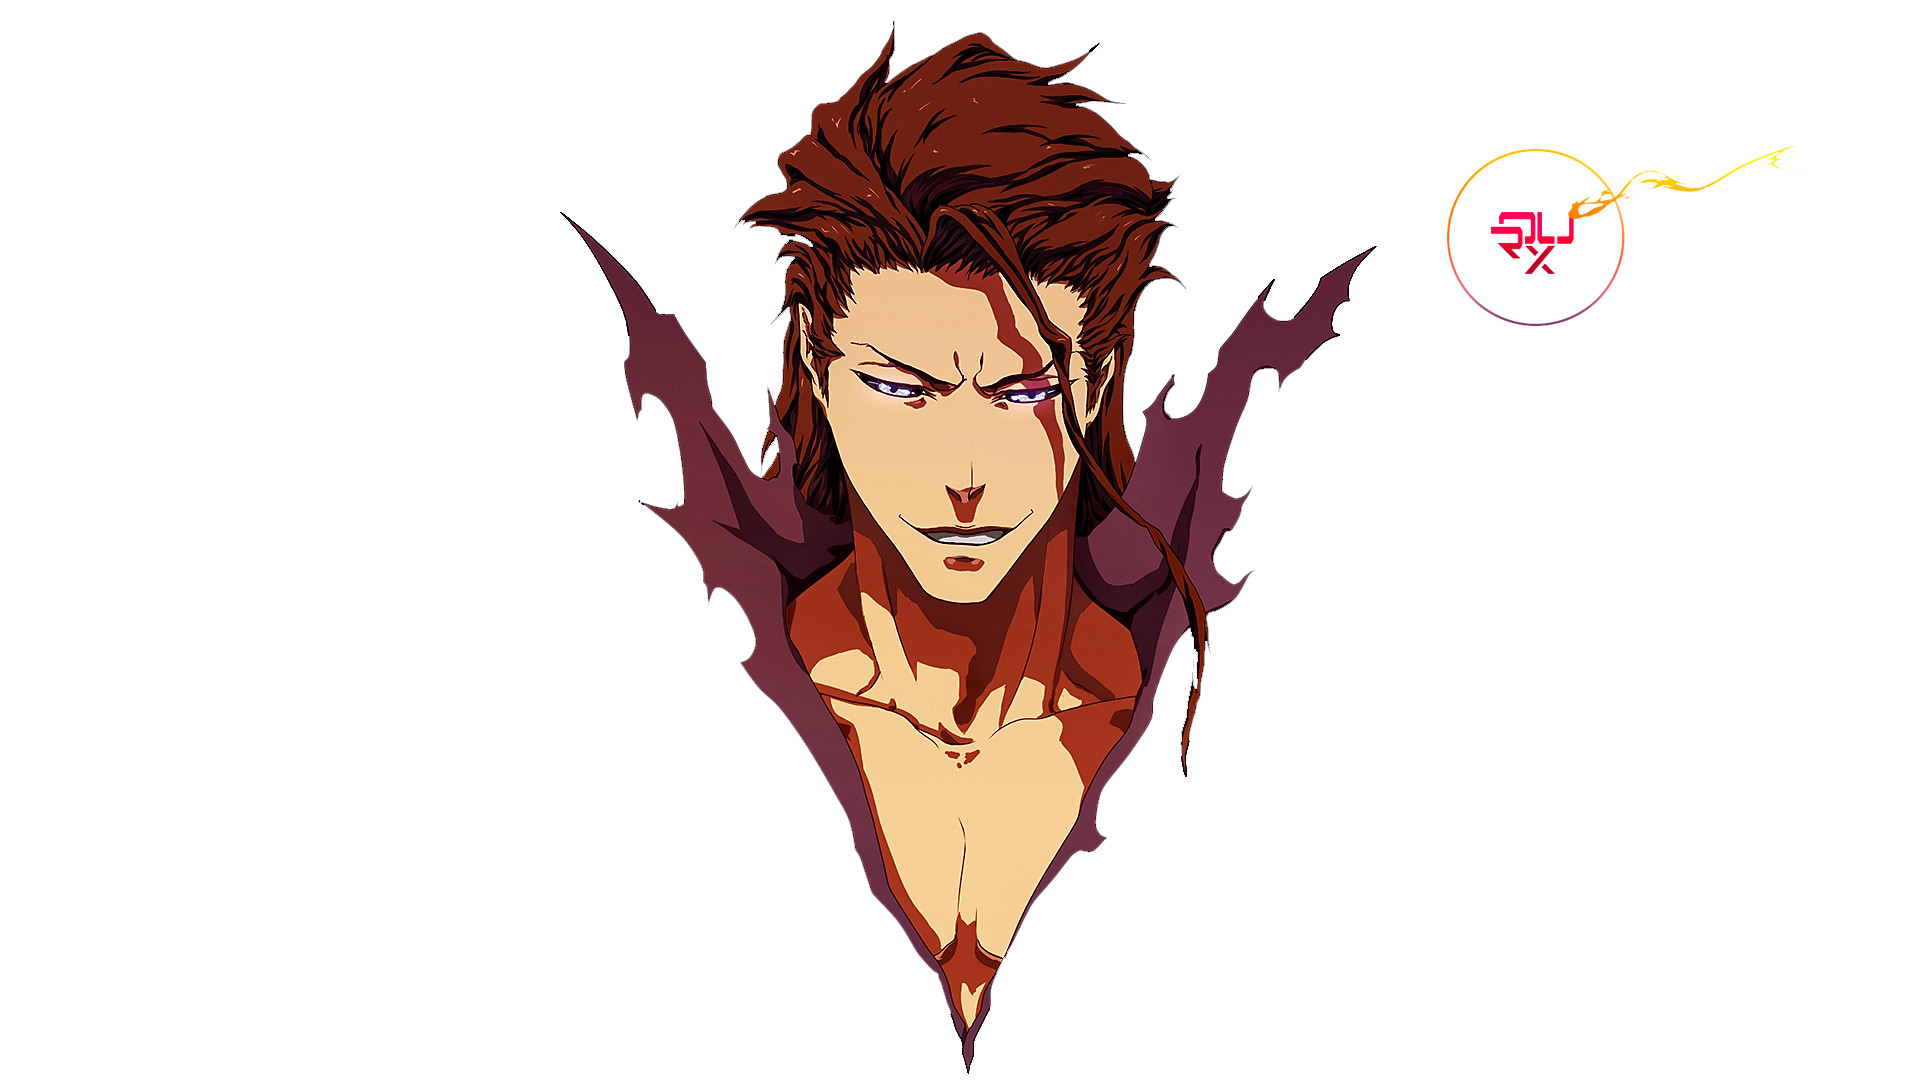 1920x1080 IFrAgMenTIx for Aizen's render used on banner; orig03 ...